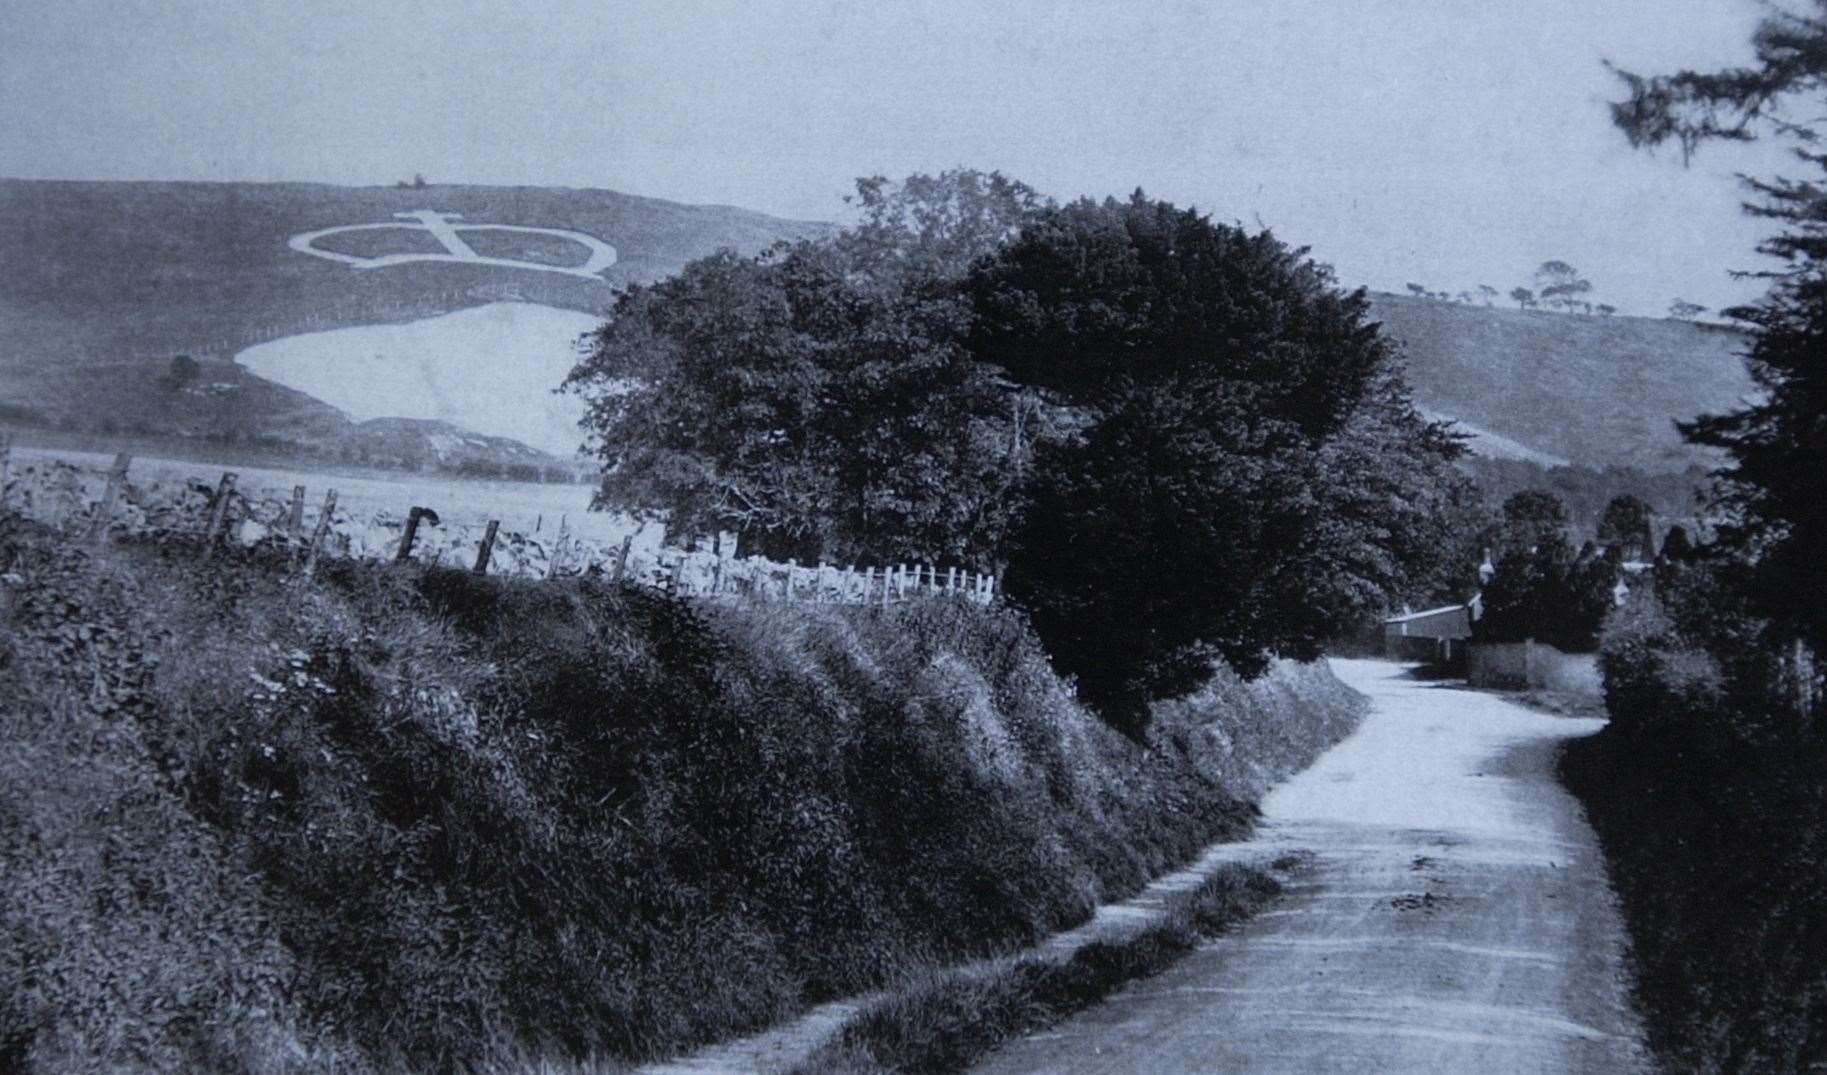 An archive photo of Wye Crown in 1902